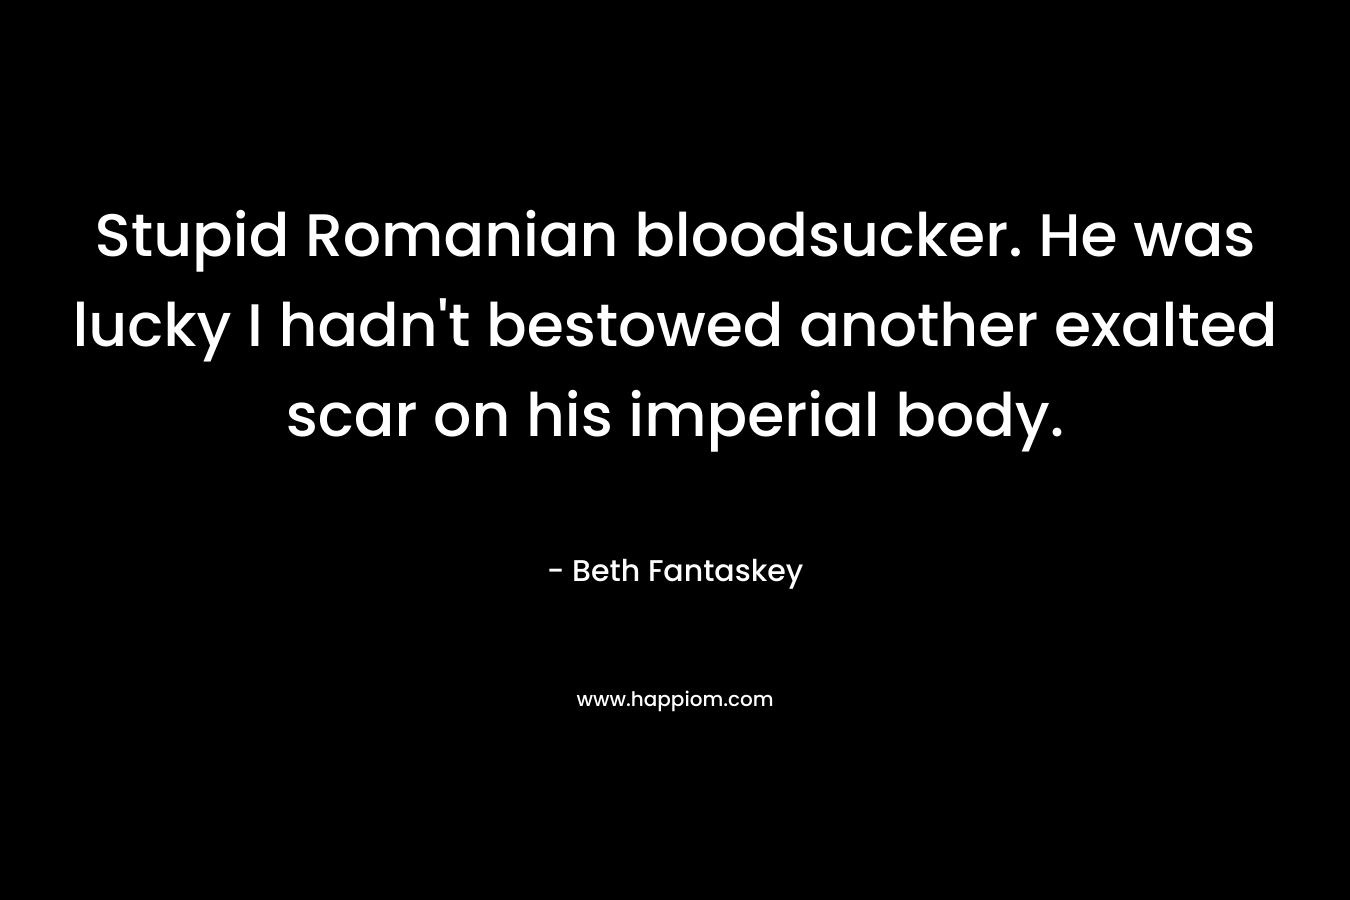 Stupid Romanian bloodsucker. He was lucky I hadn’t bestowed another exalted scar on his imperial body. – Beth Fantaskey